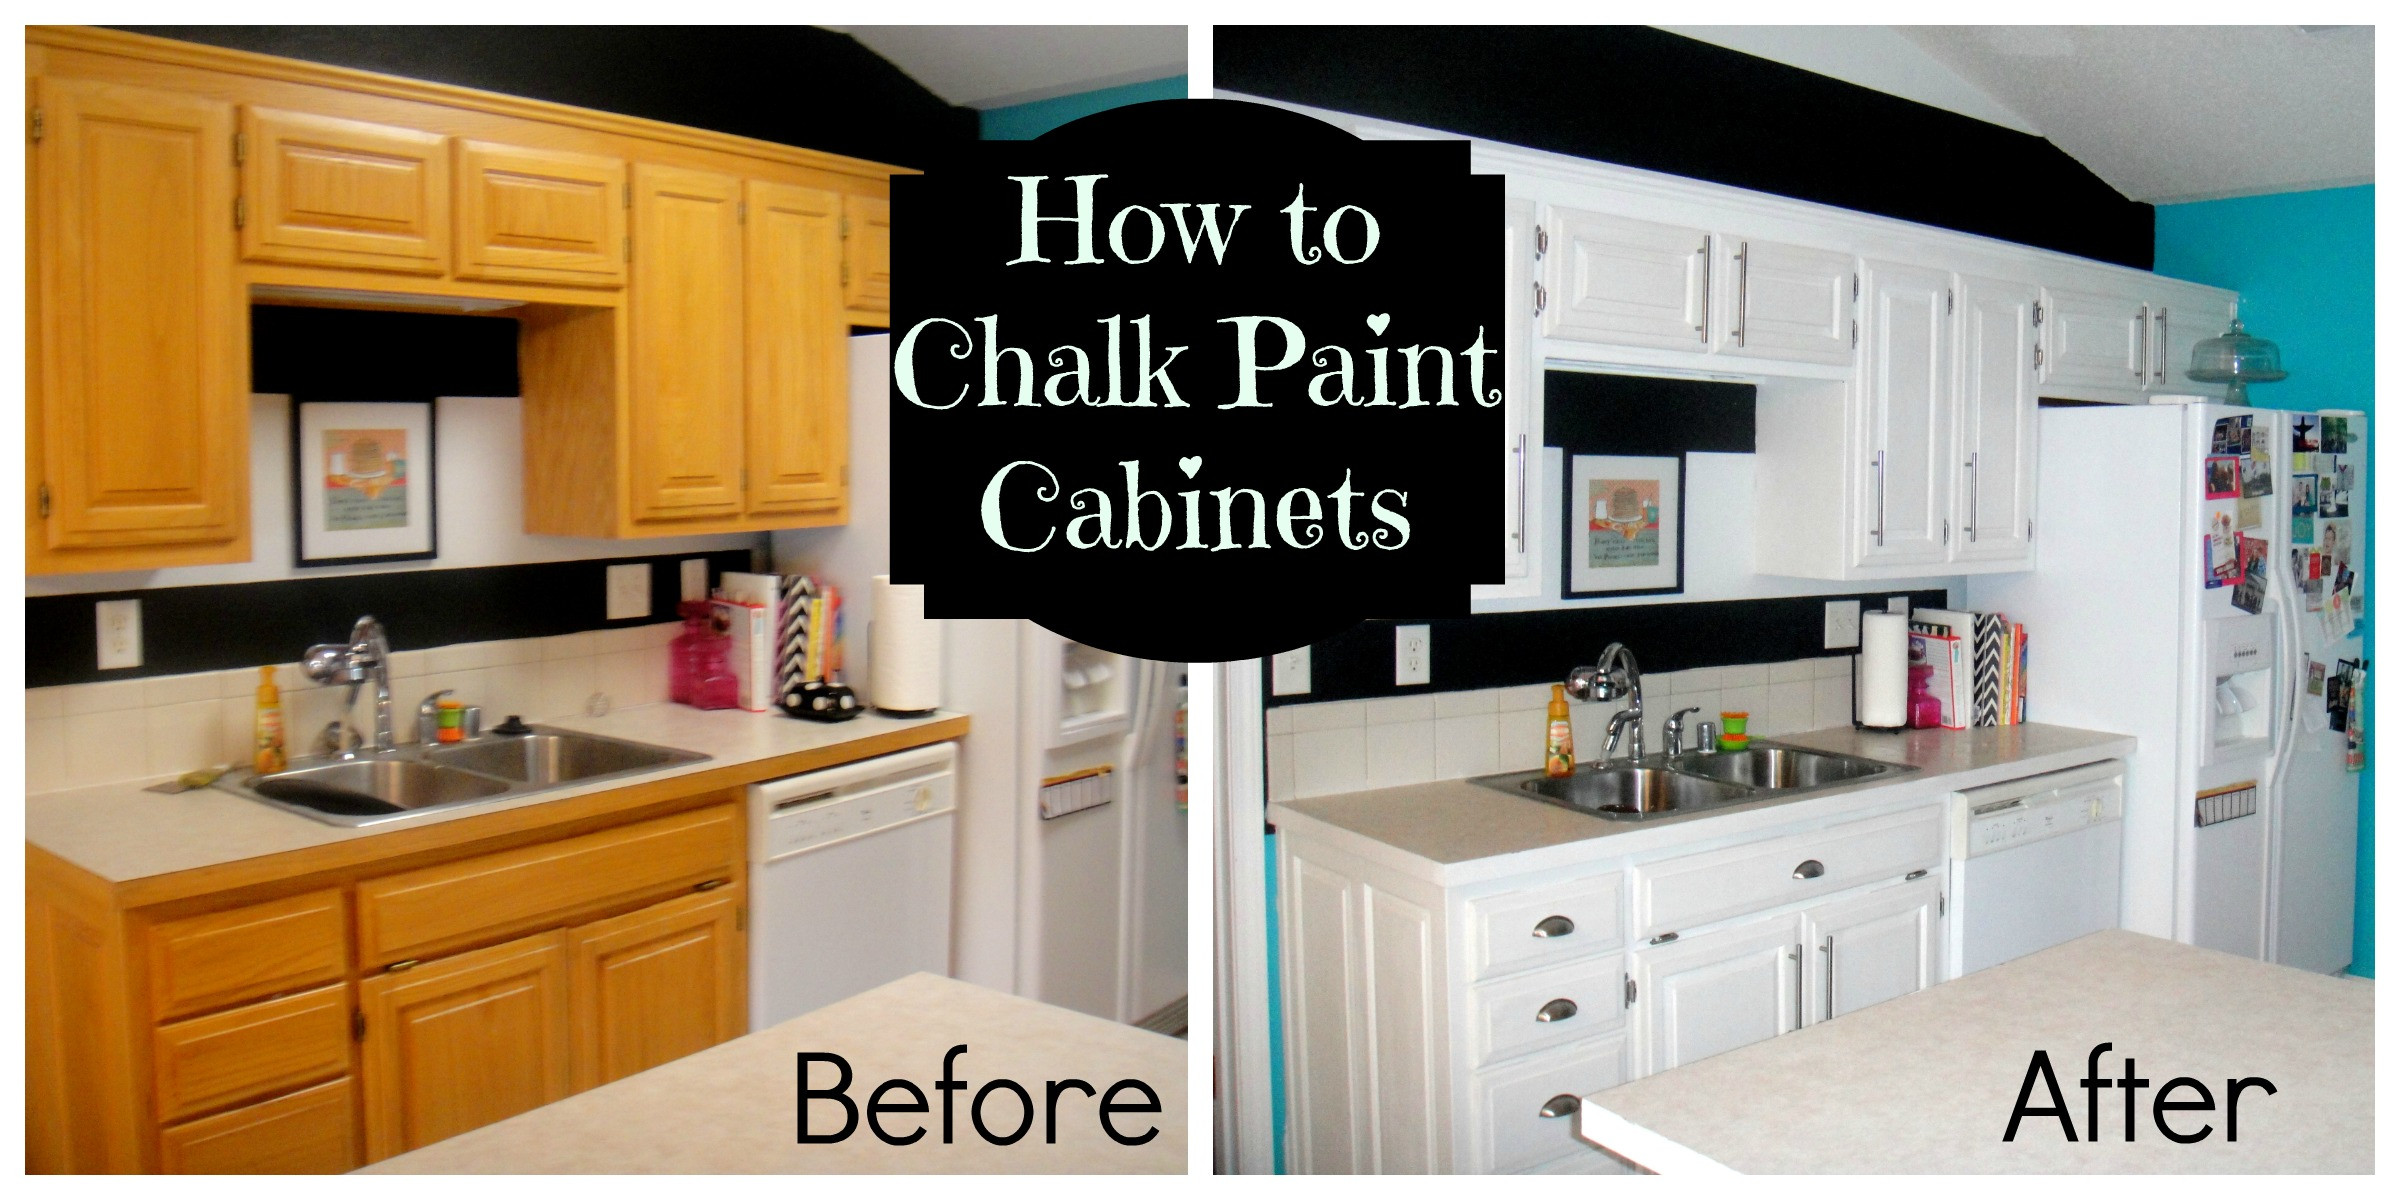 Chalk Paint Kitchen Cabinets Before And After
 How to chalk paint